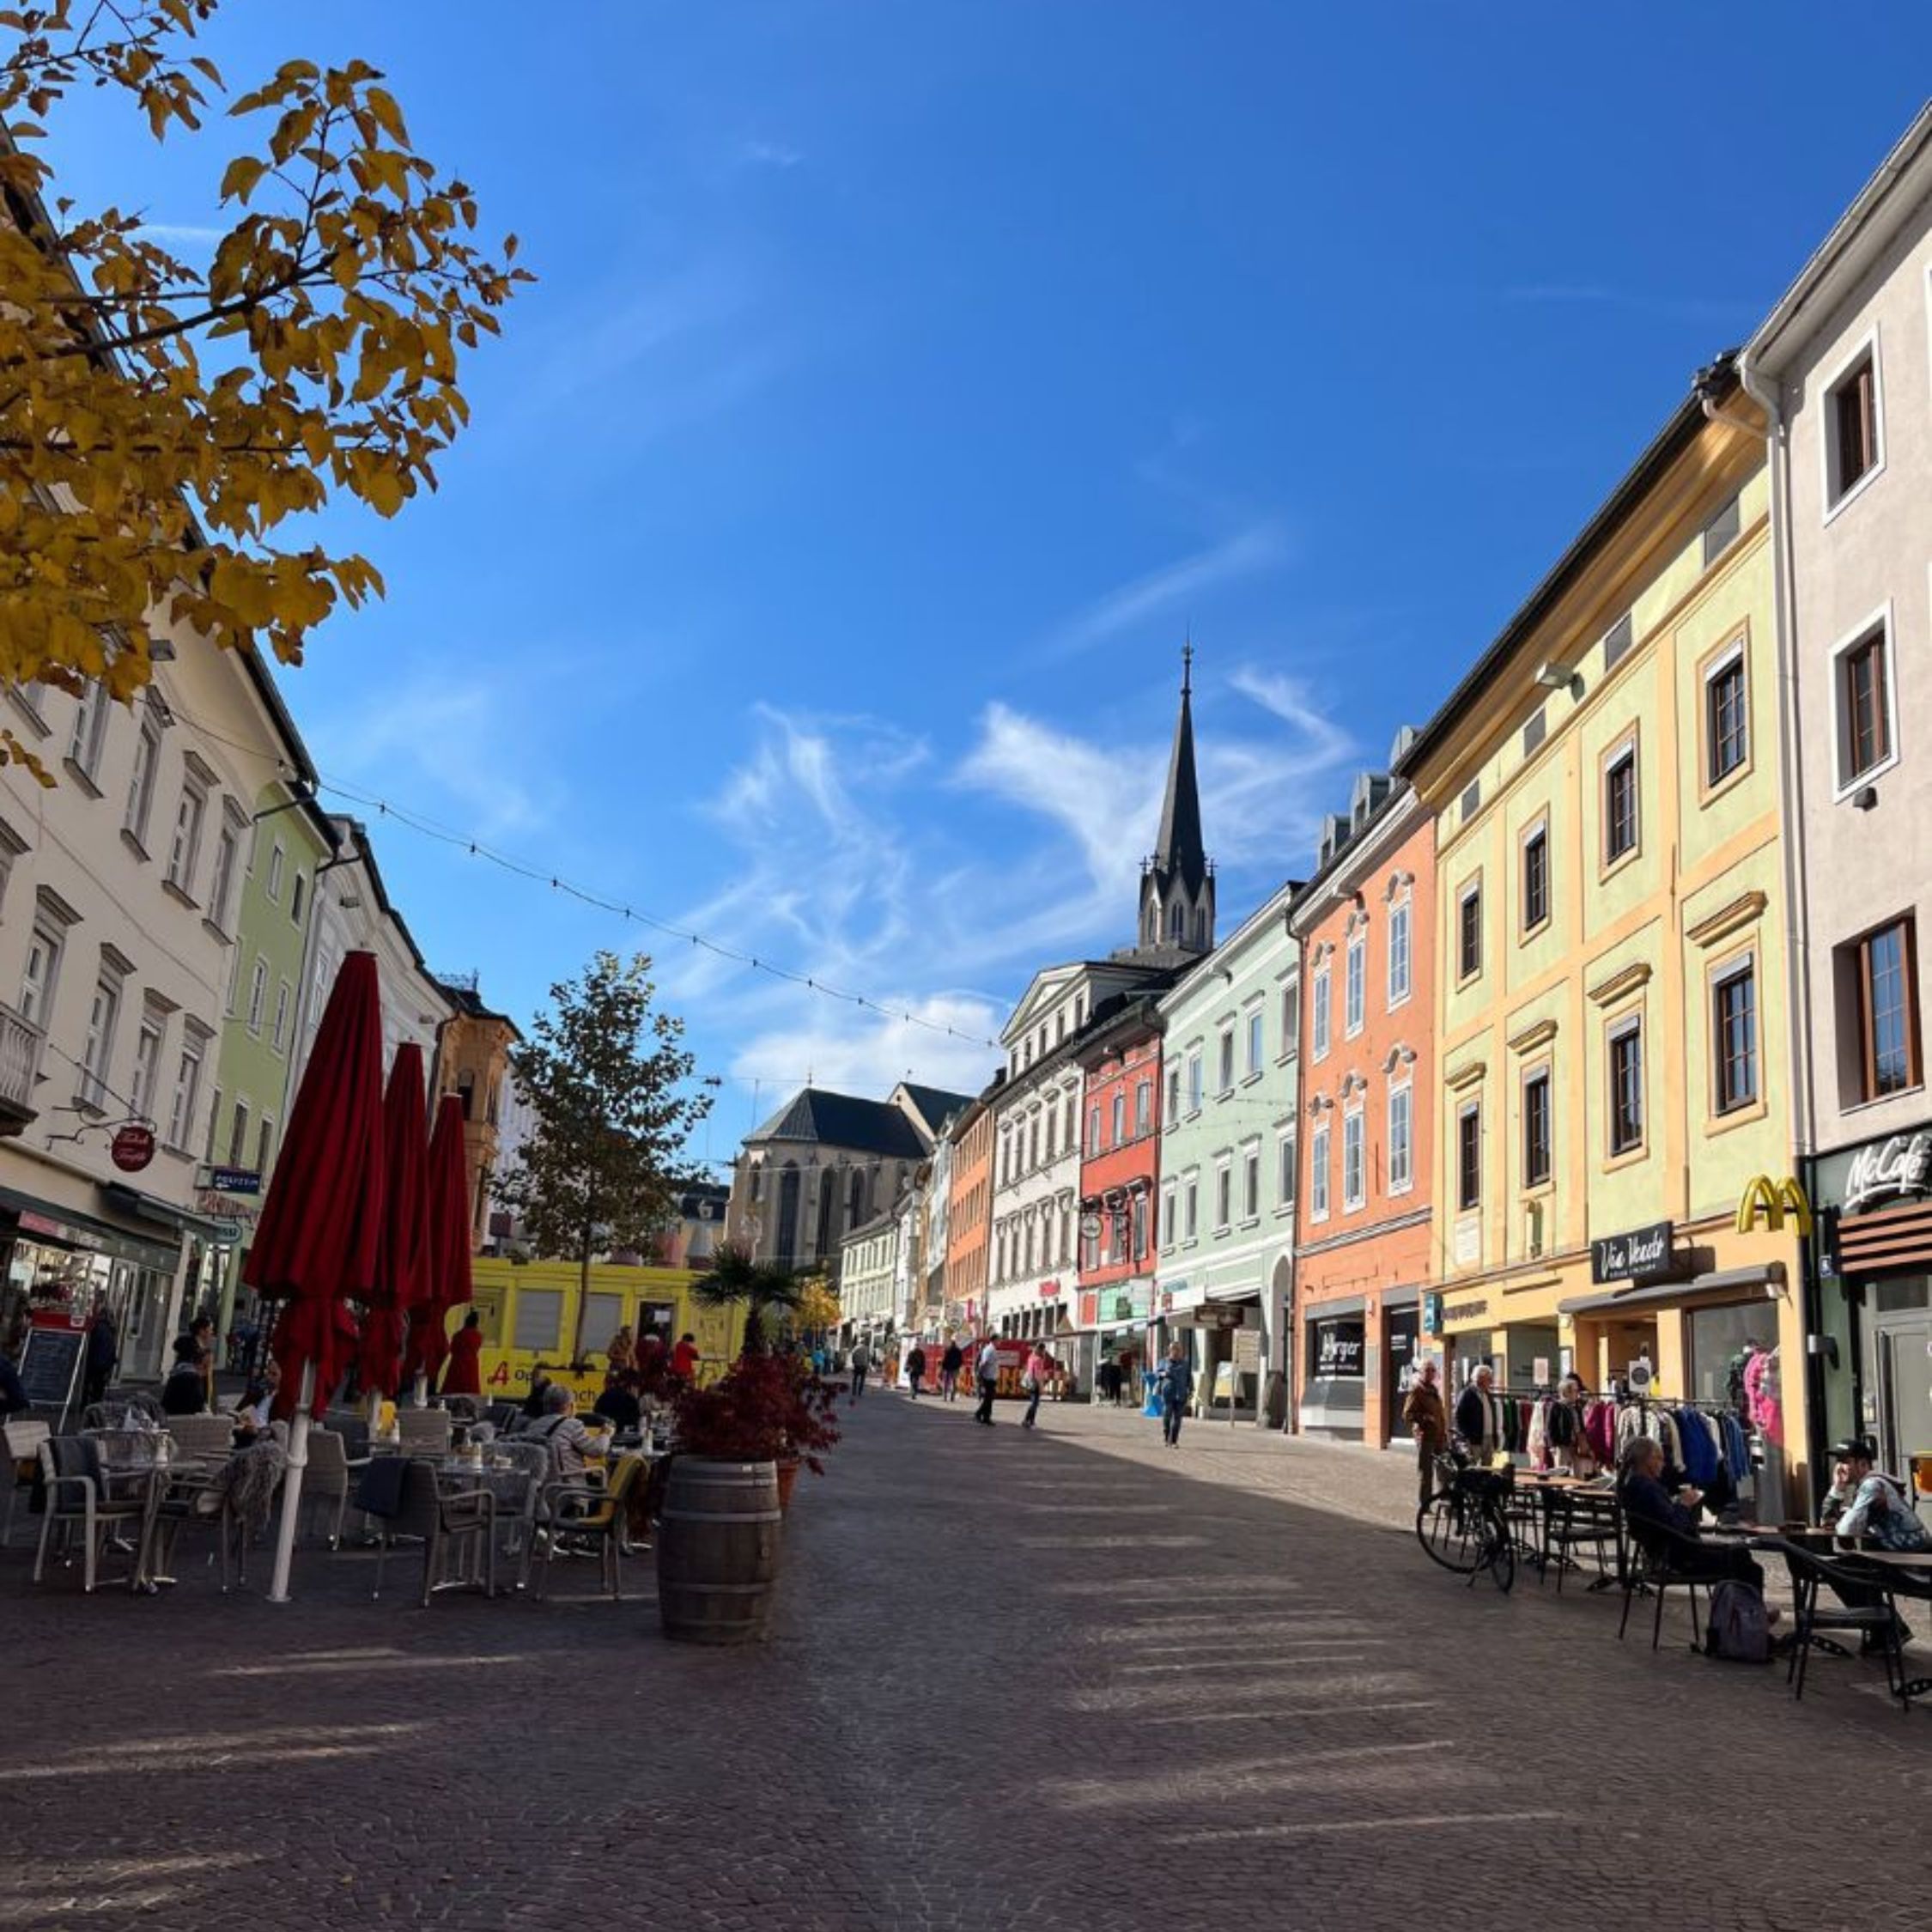 The main square of Villach